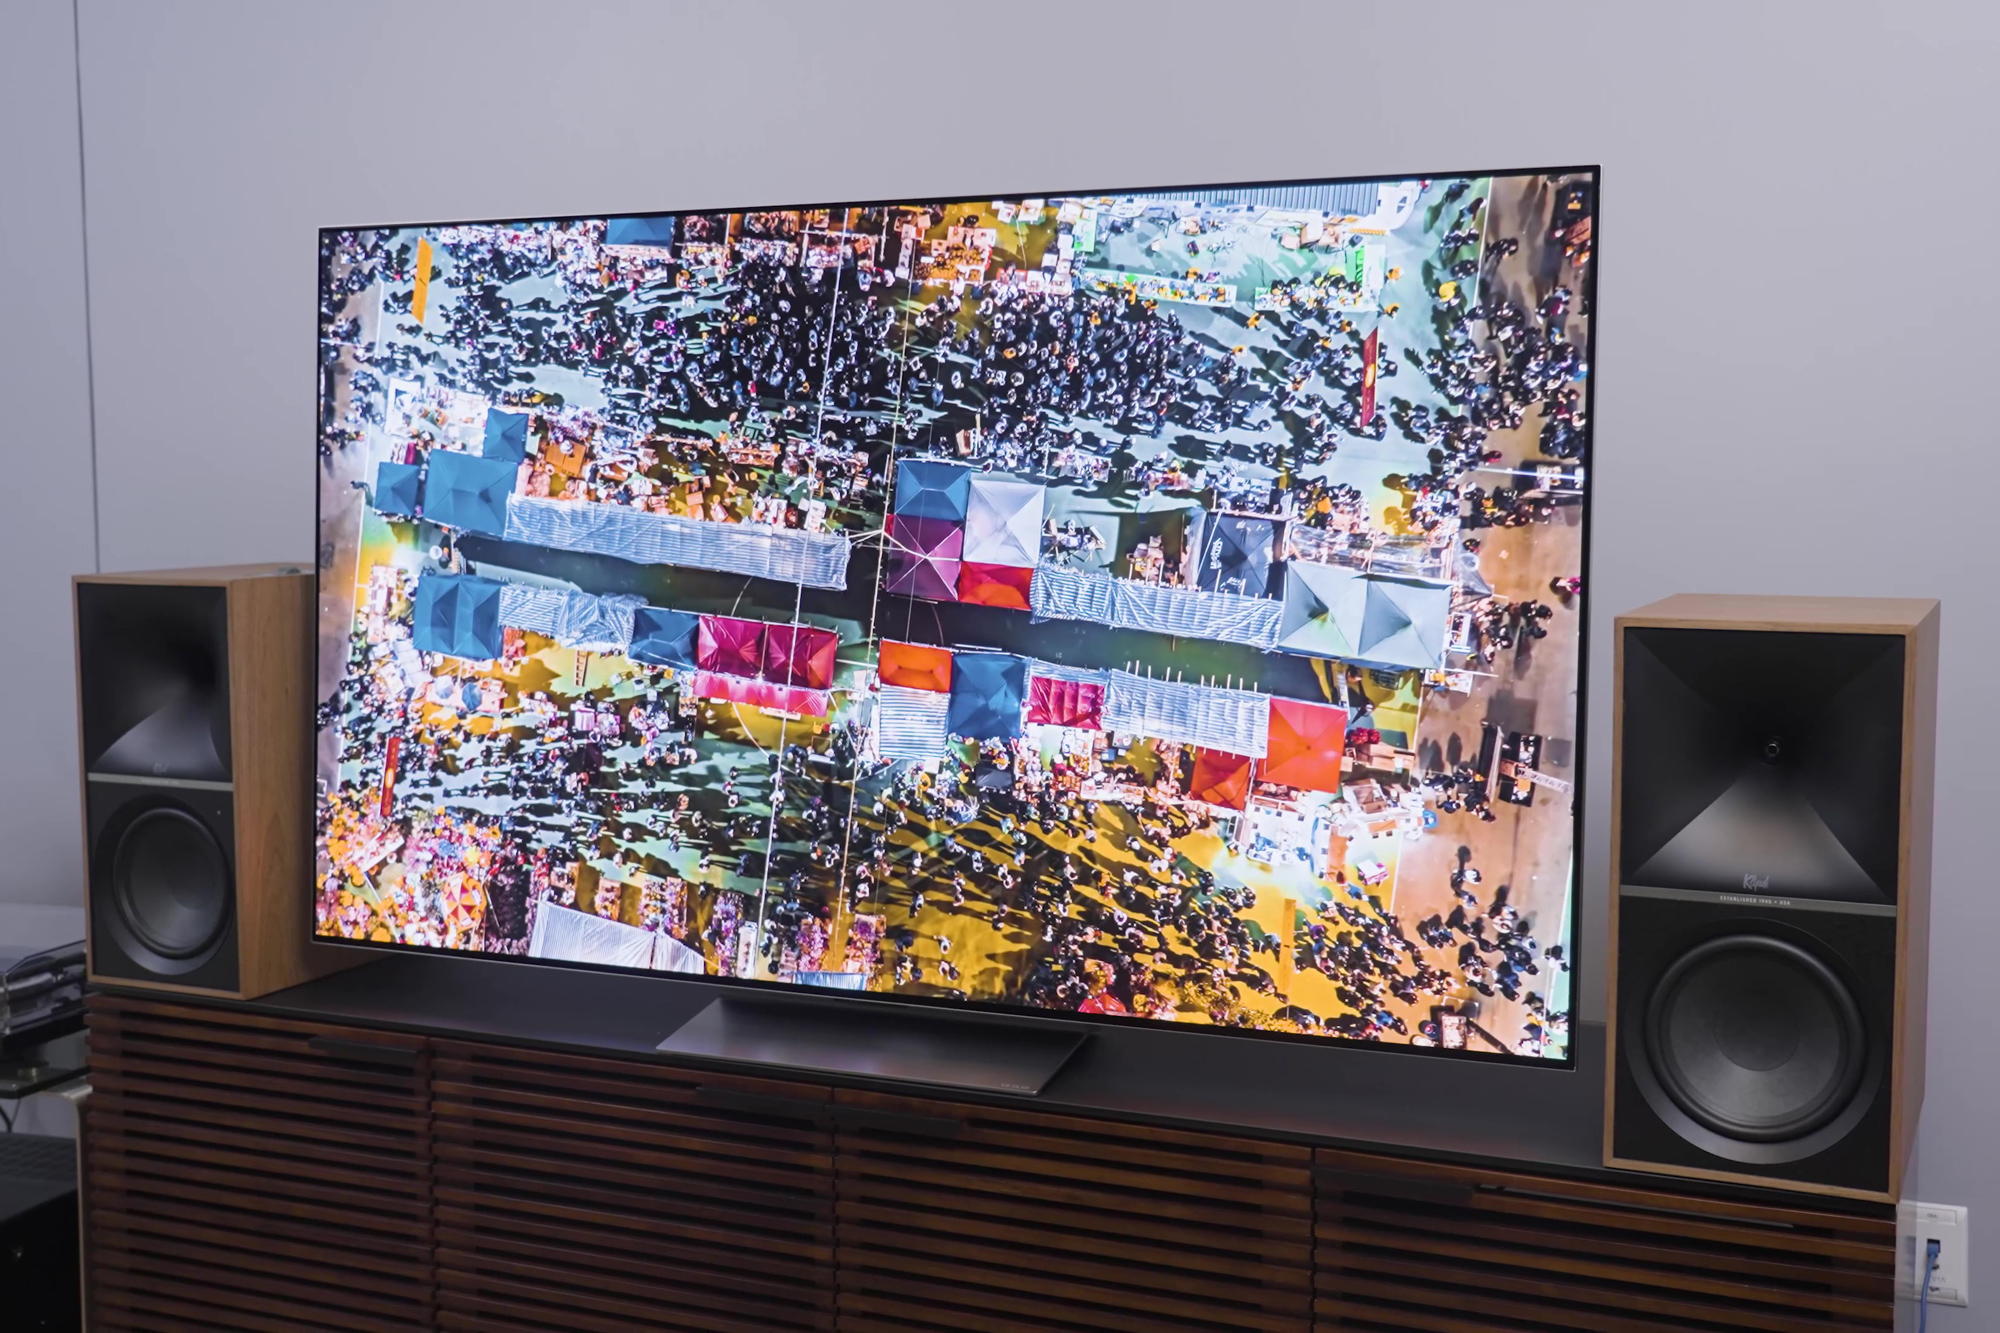 LG G3 OLED TV Review: The New Picture Quality Champ - CNET